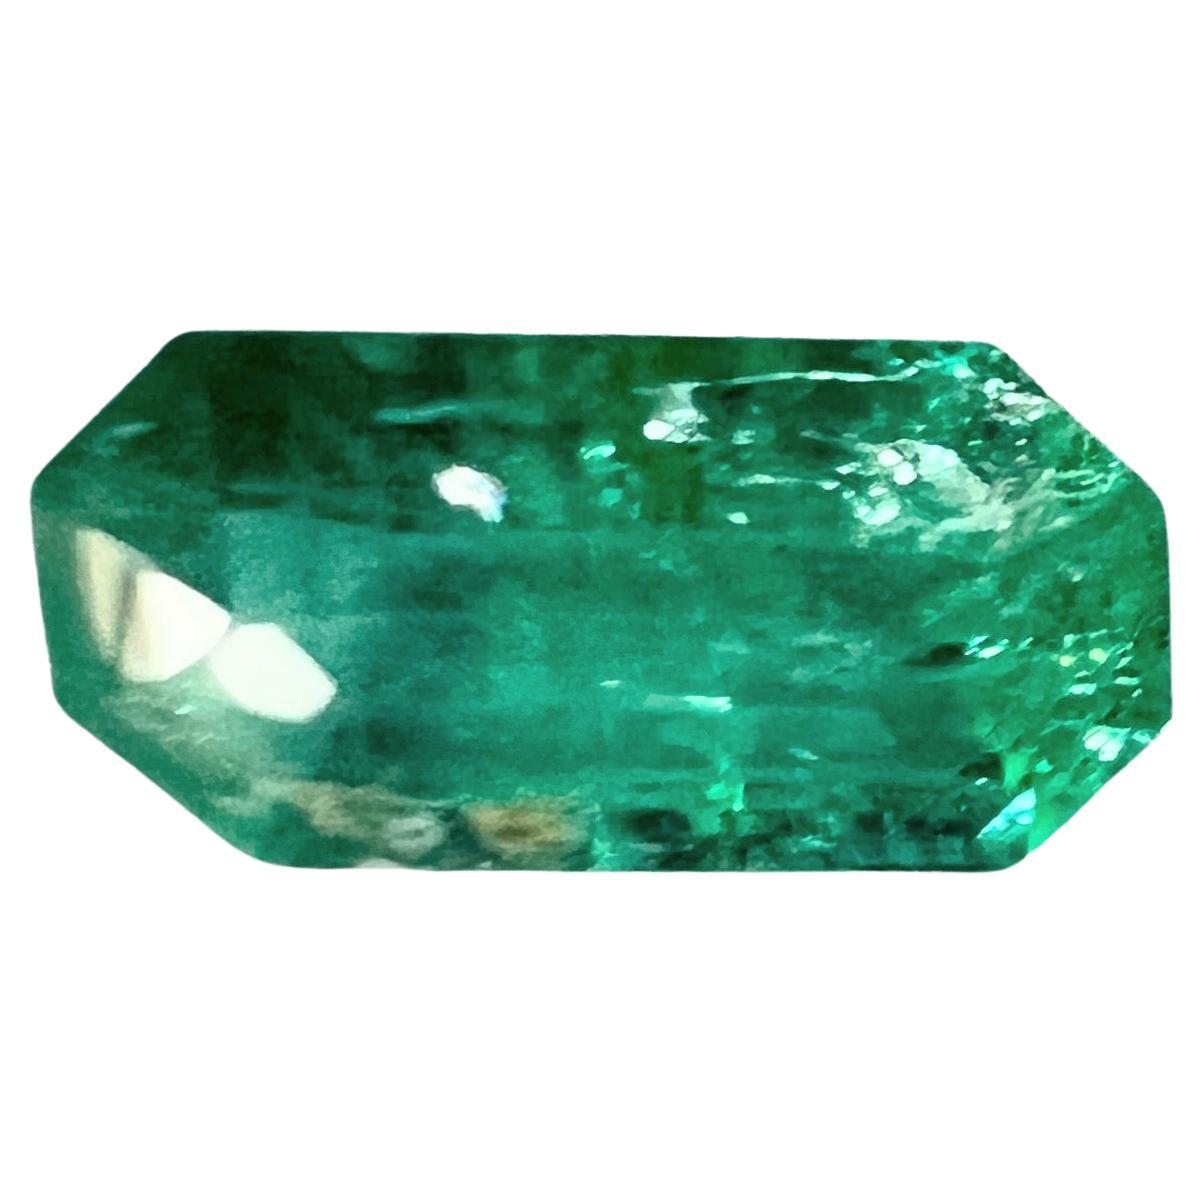 Introducing our exquisite 2.35-carat Rectangular Emerald Gemstone, a natural treasure that exudes elegance and sophistication. This non-oiled, genuine emerald boasts a classic rectangular cut, highlighting its deep, verdant